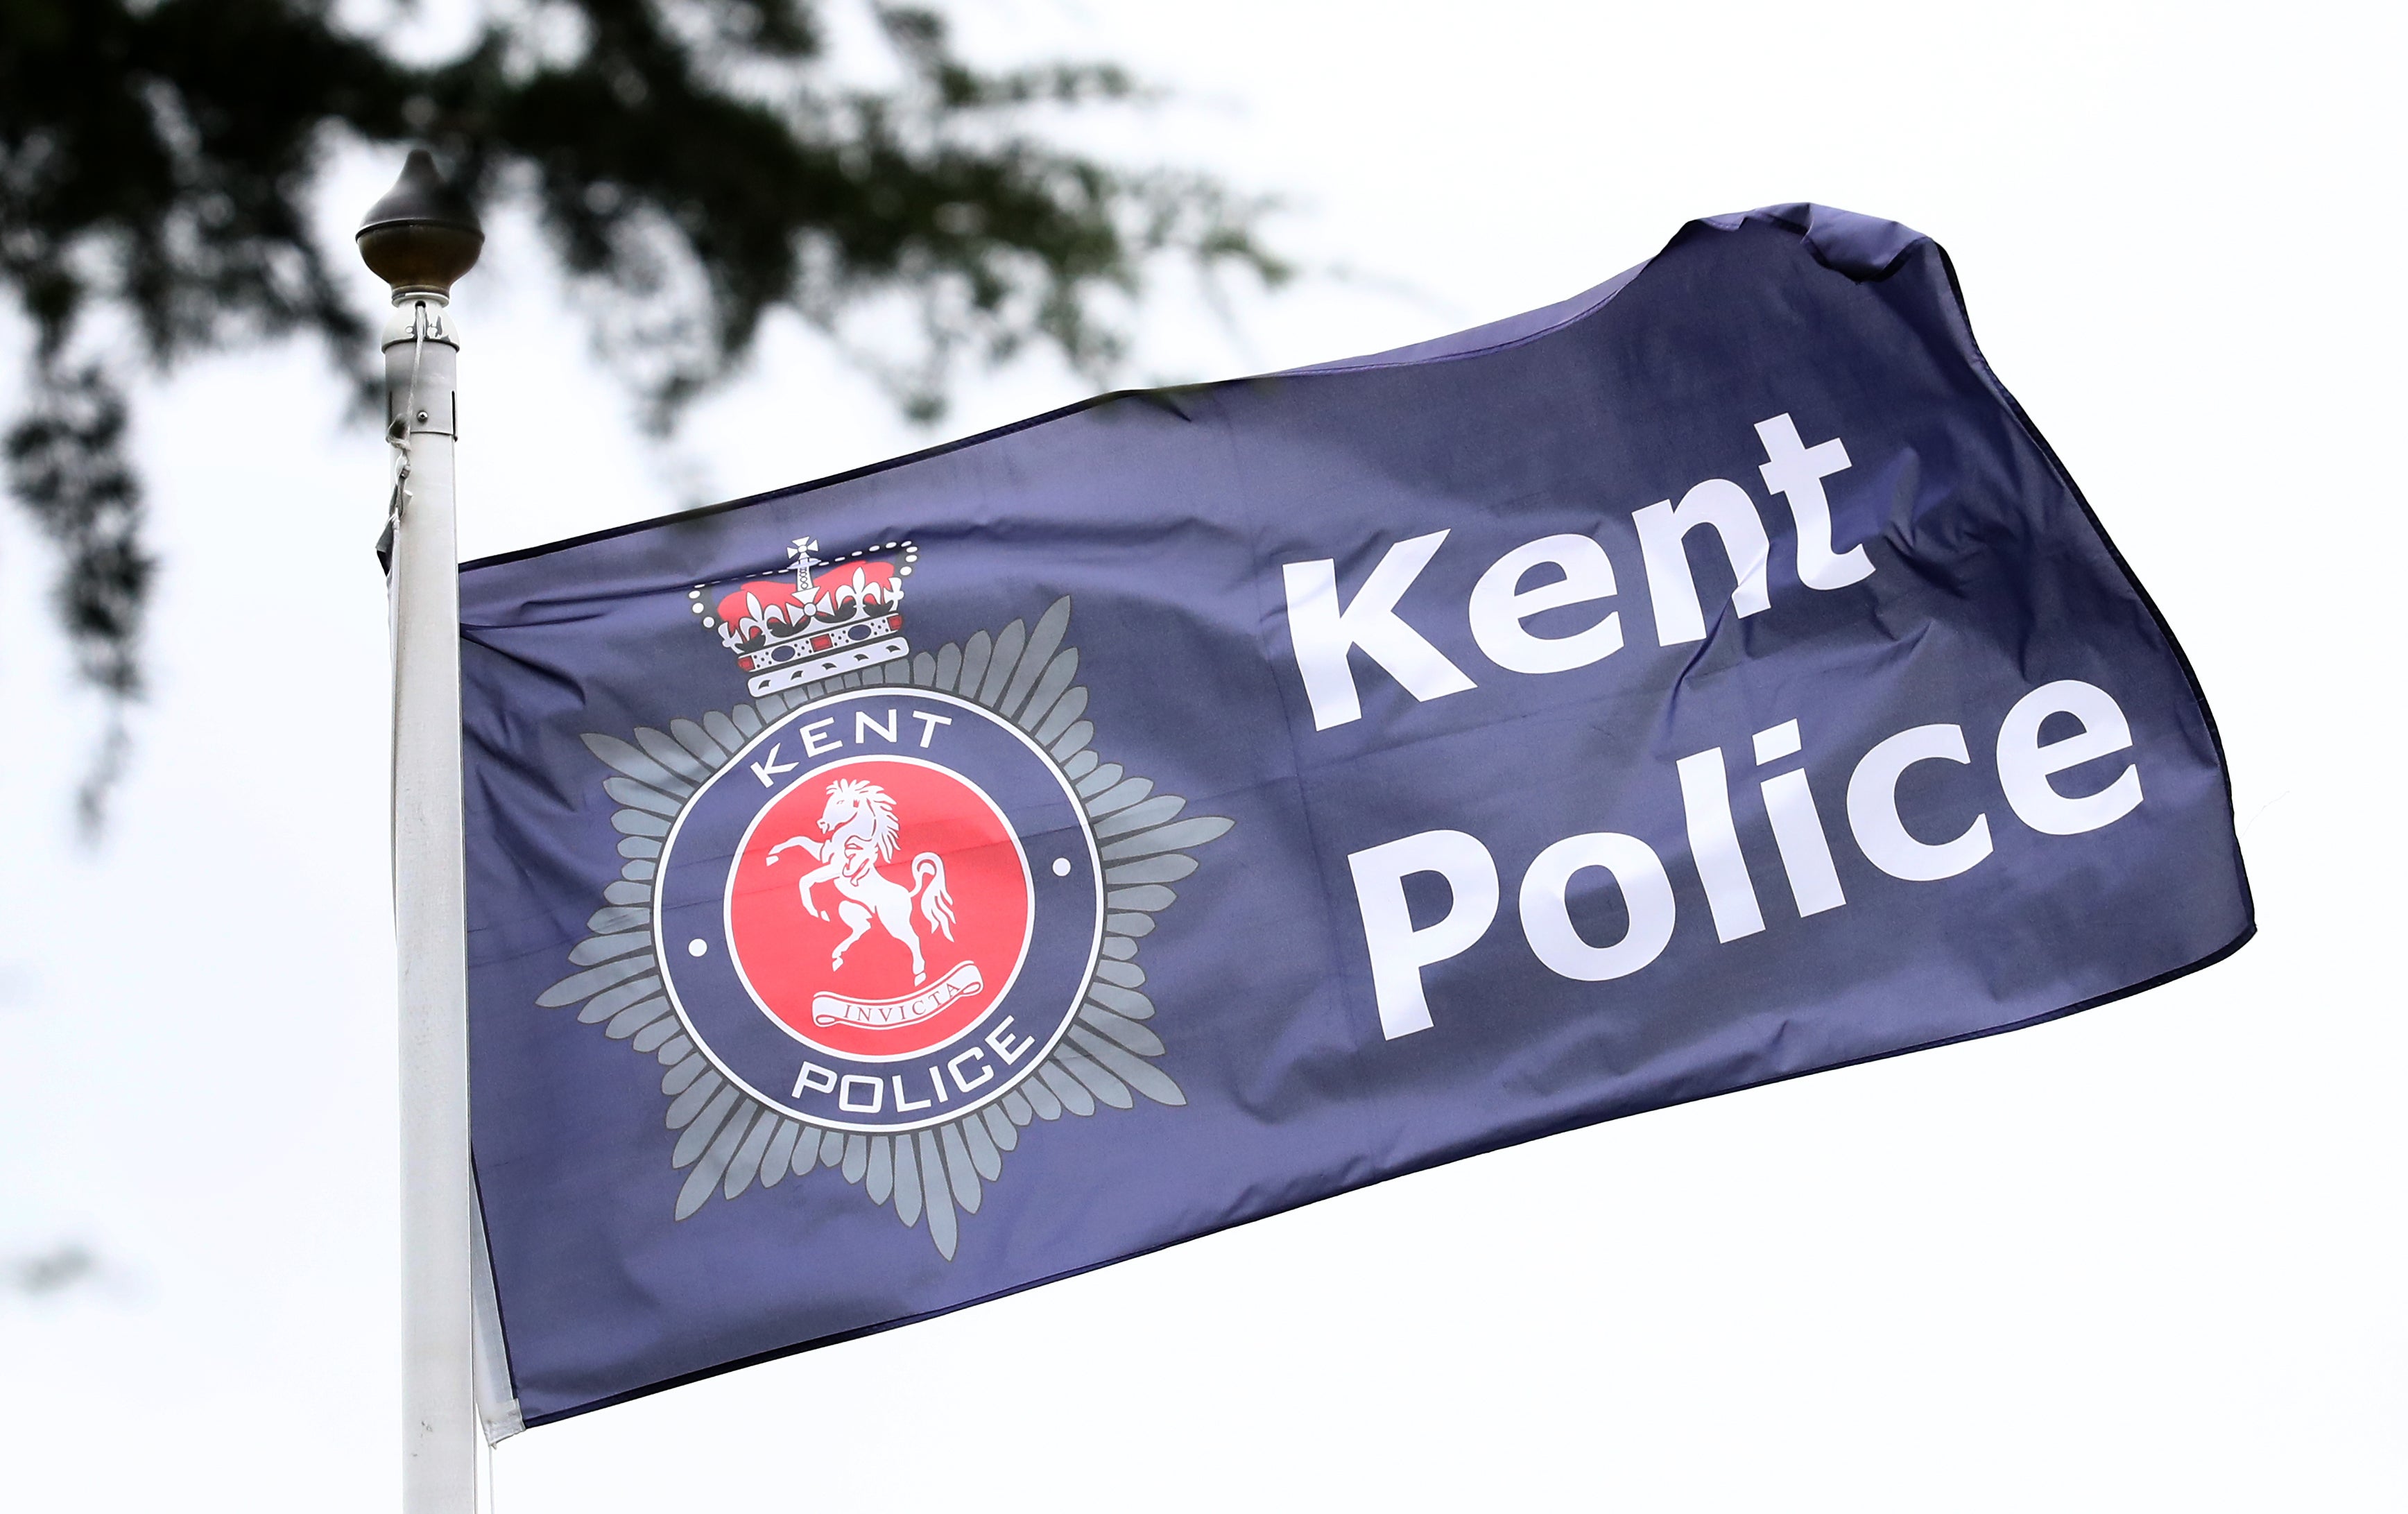 The Kent Police flag at police headquarters in Maidstone, Kent (Gareth Fuller/PA)